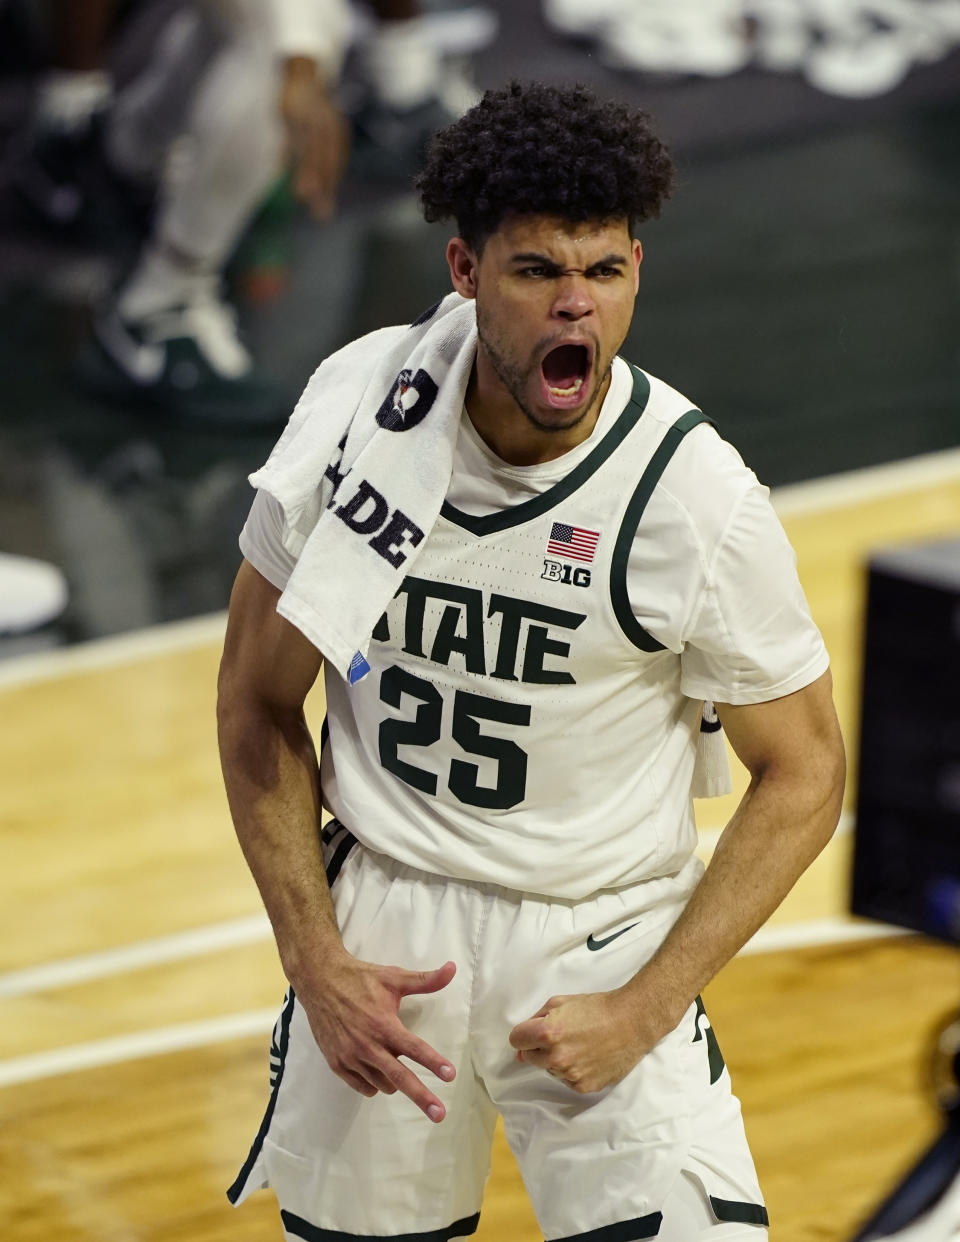 Michigan State forward Malik Hall reacts after a teammate's three-point basket during the first half of an NCAA college basketball game against Michigan, Sunday, March 7, 2021, in East Lansing, Mich. (AP Photo/Carlos Osorio)